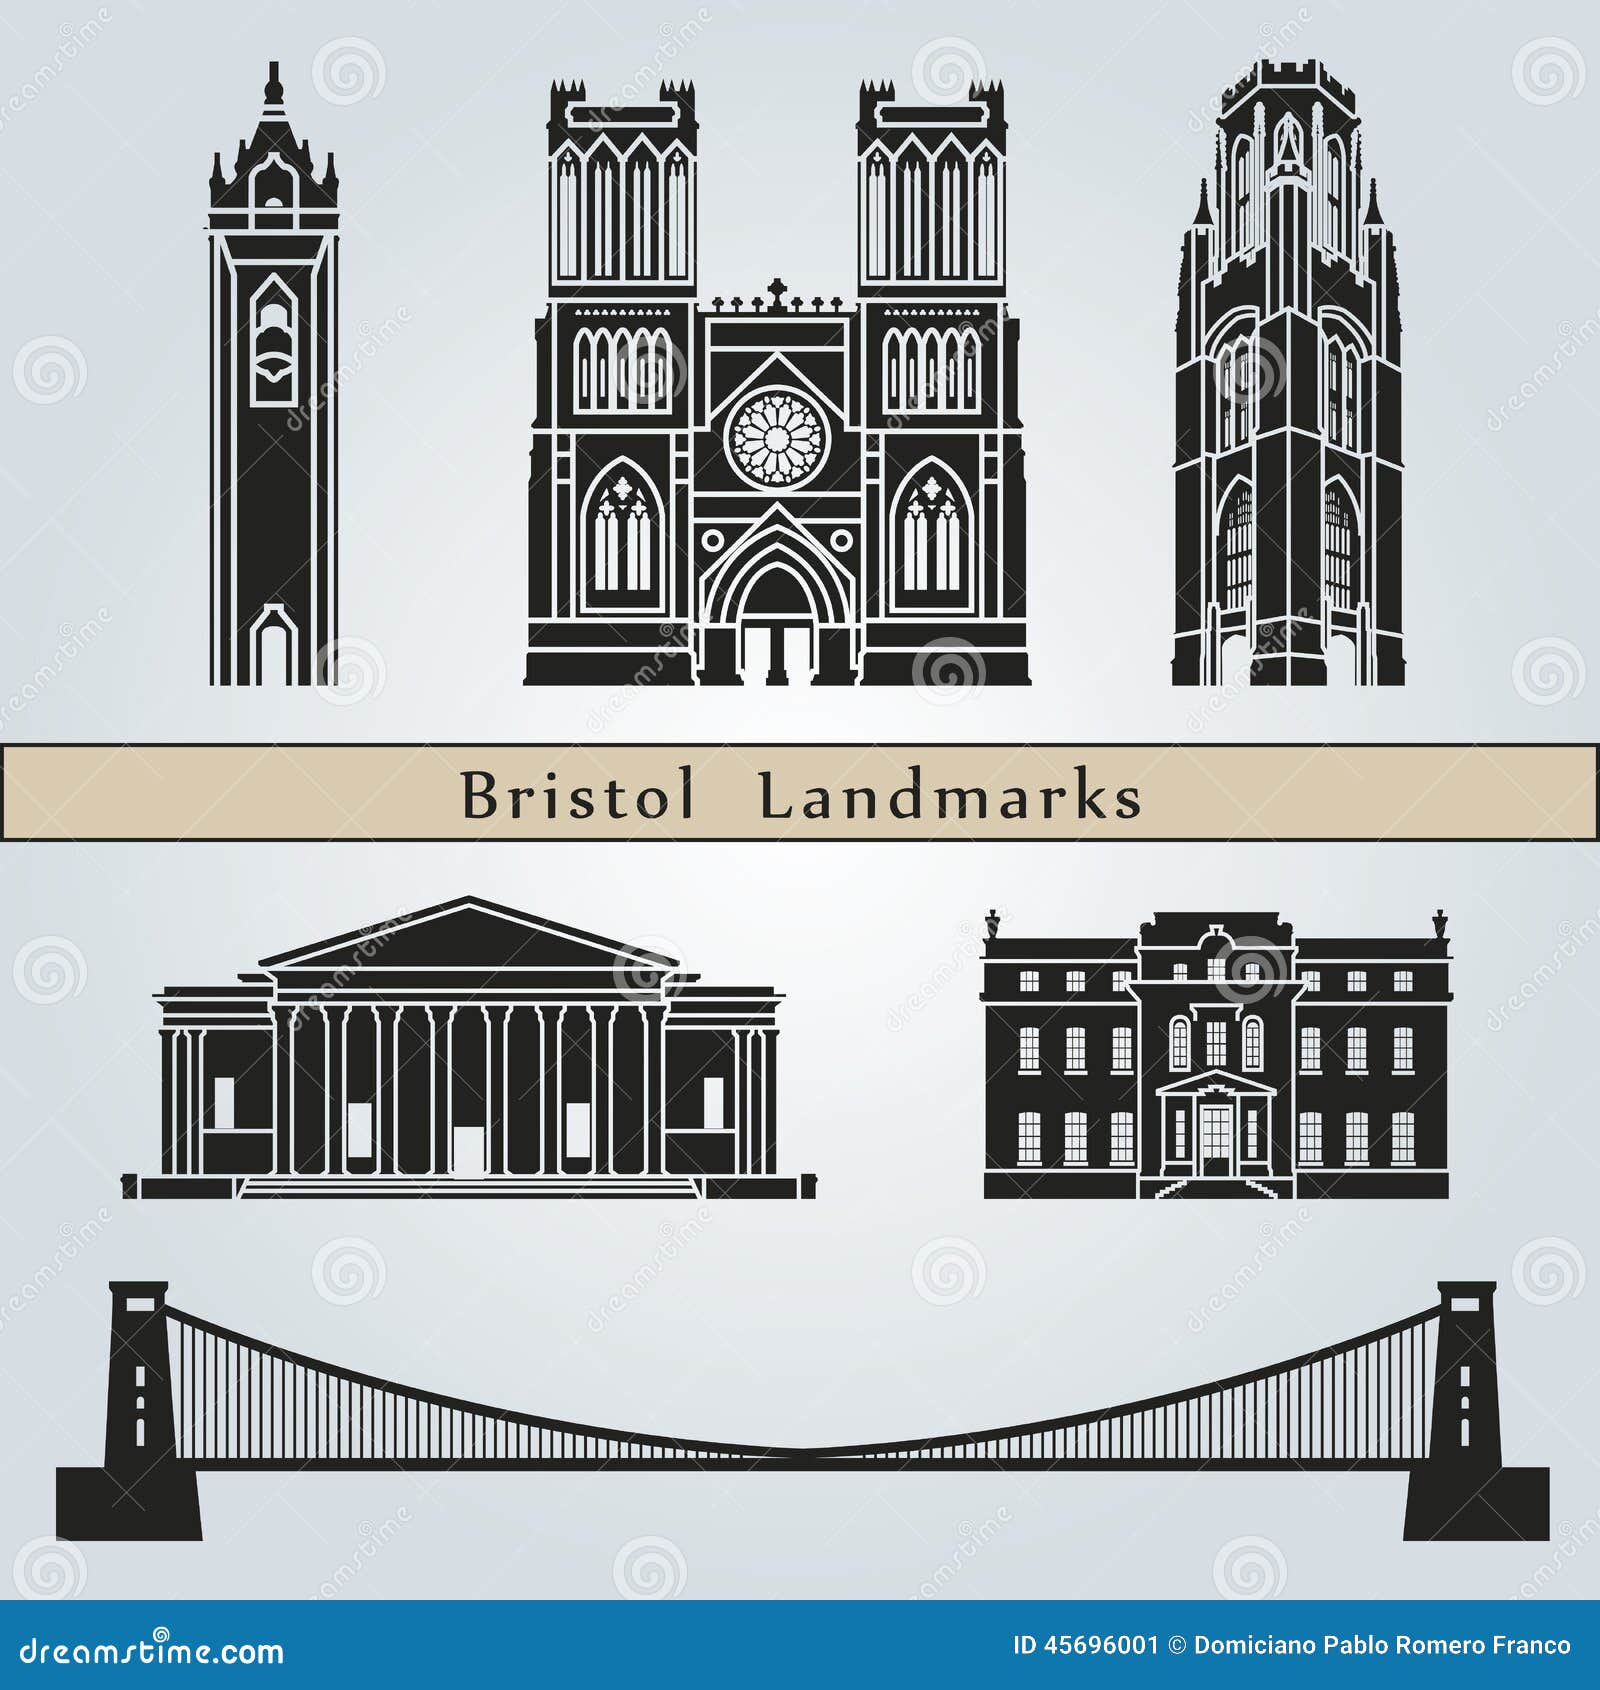 File:Bristol landmarks collage.png - Wikimedia Commons